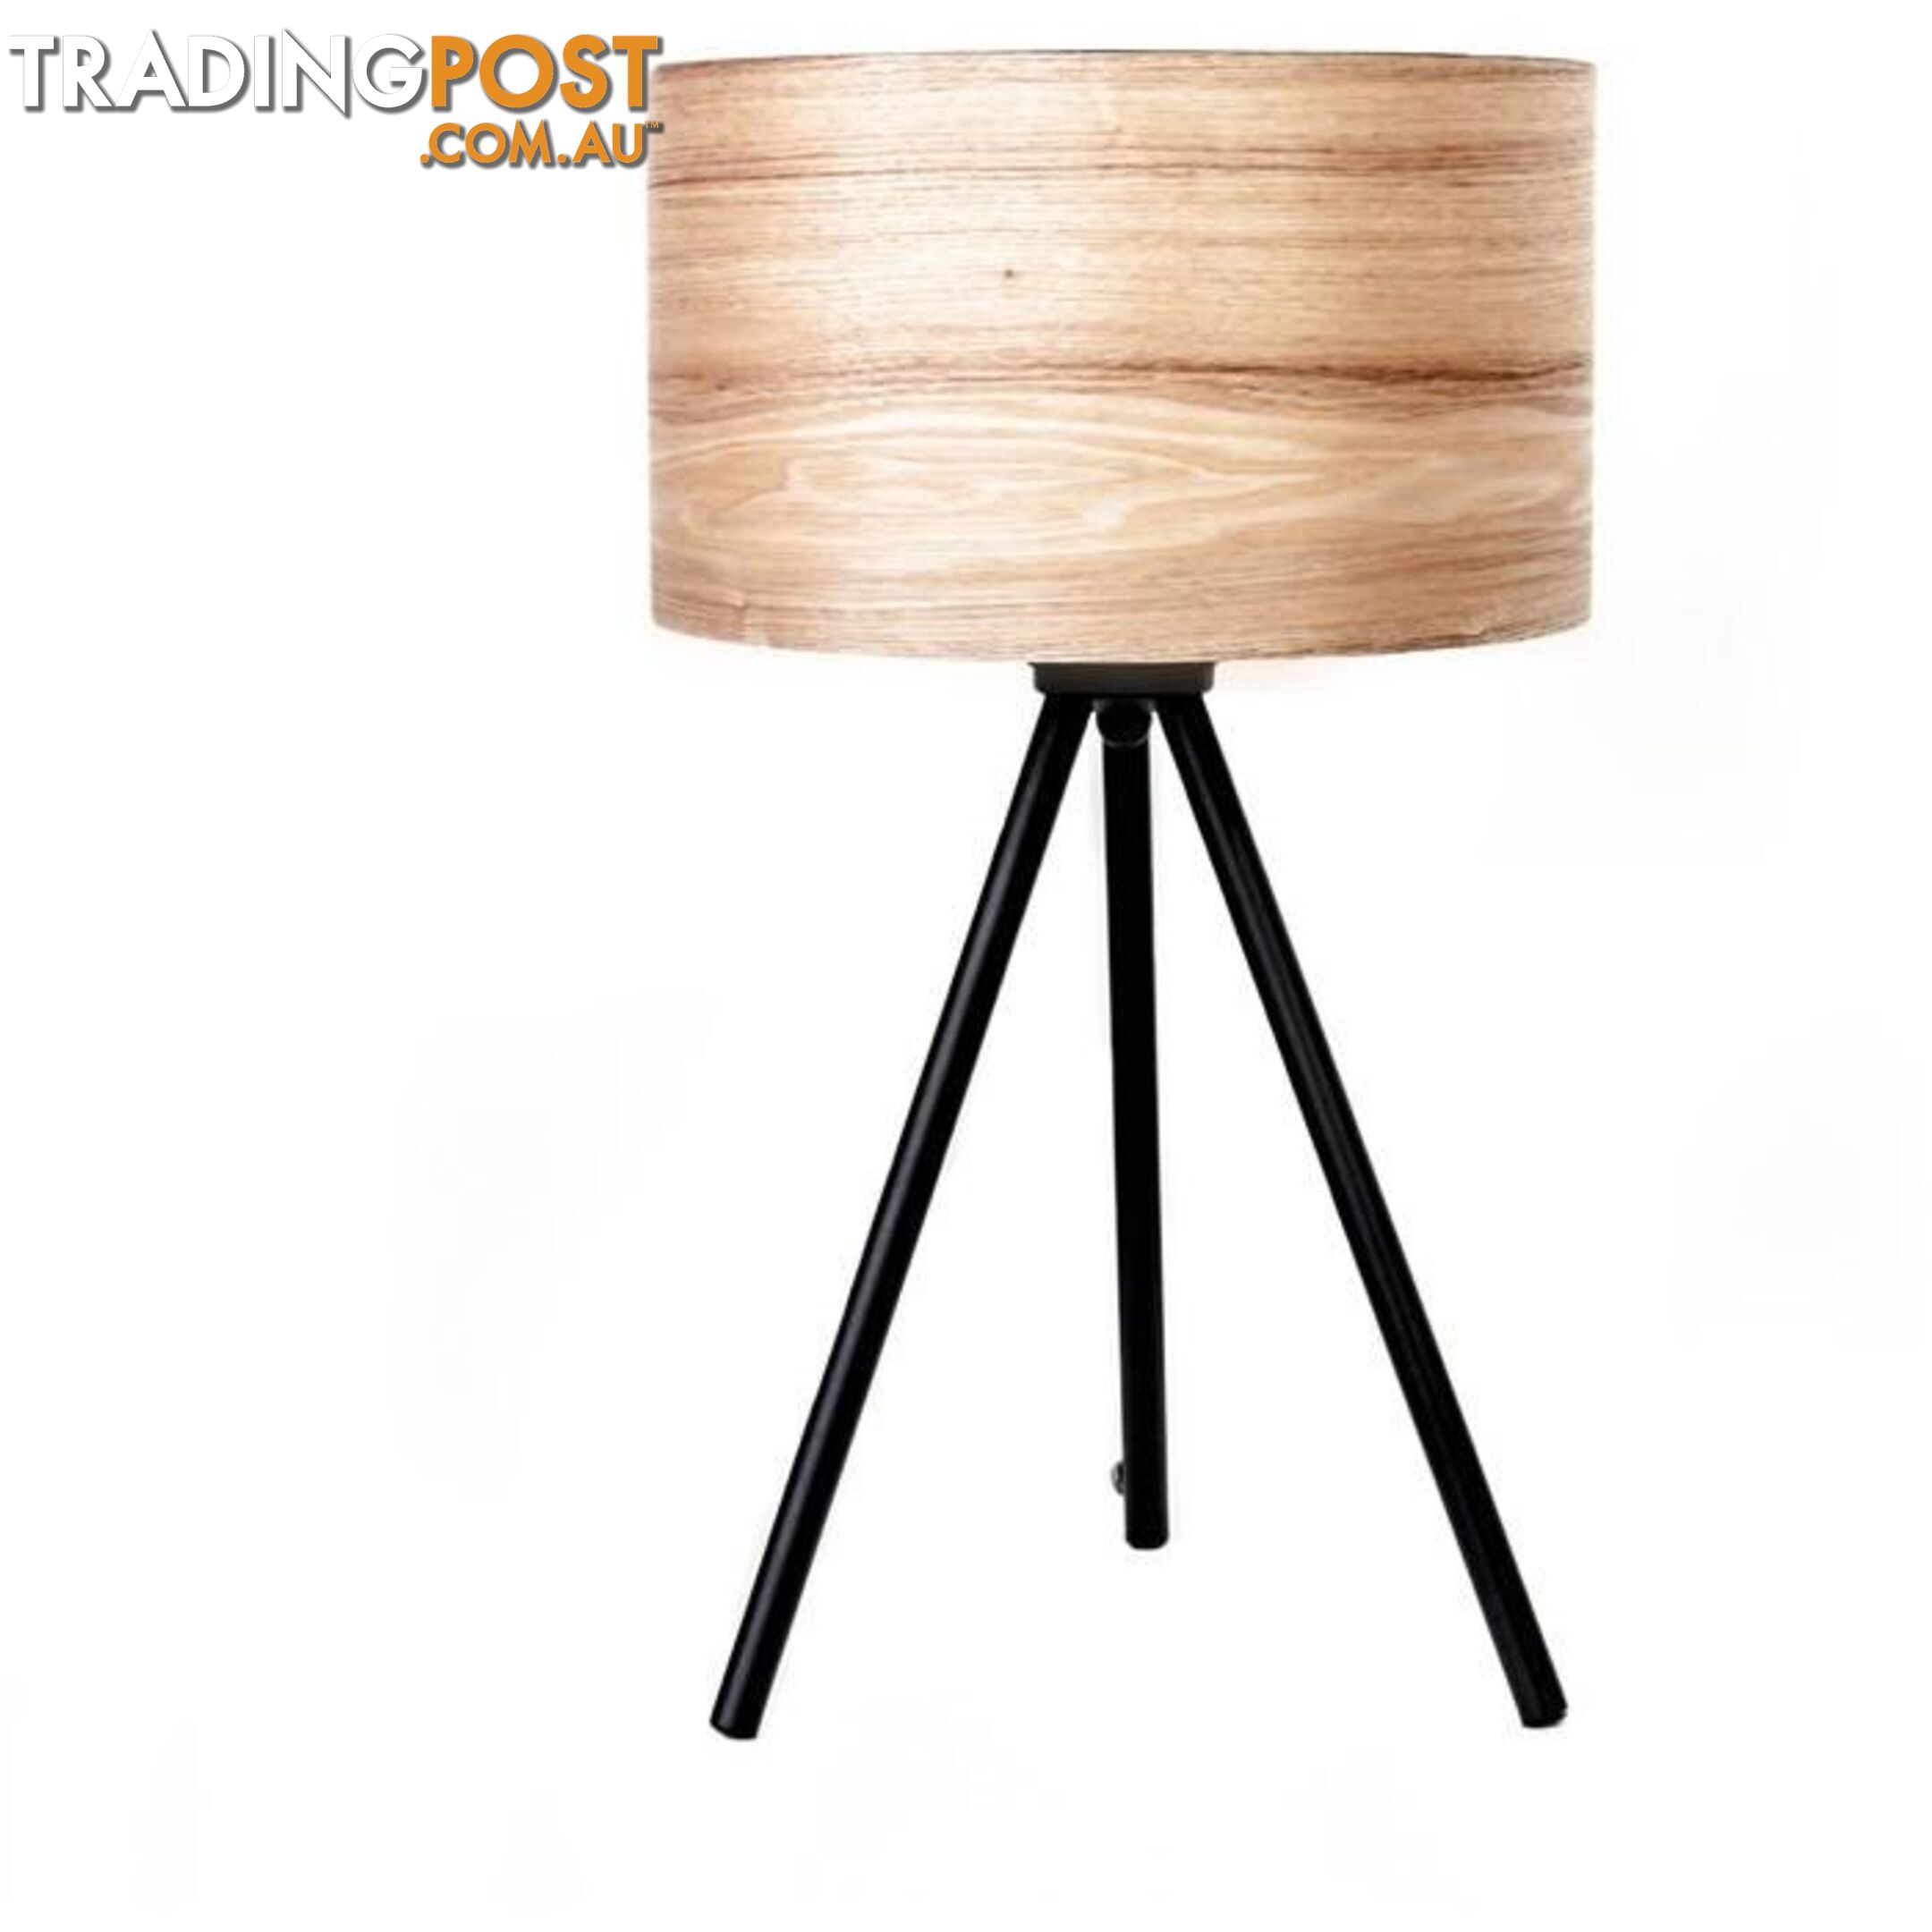 Wooden Ash Table Lamp - 13011 - 9334719000039